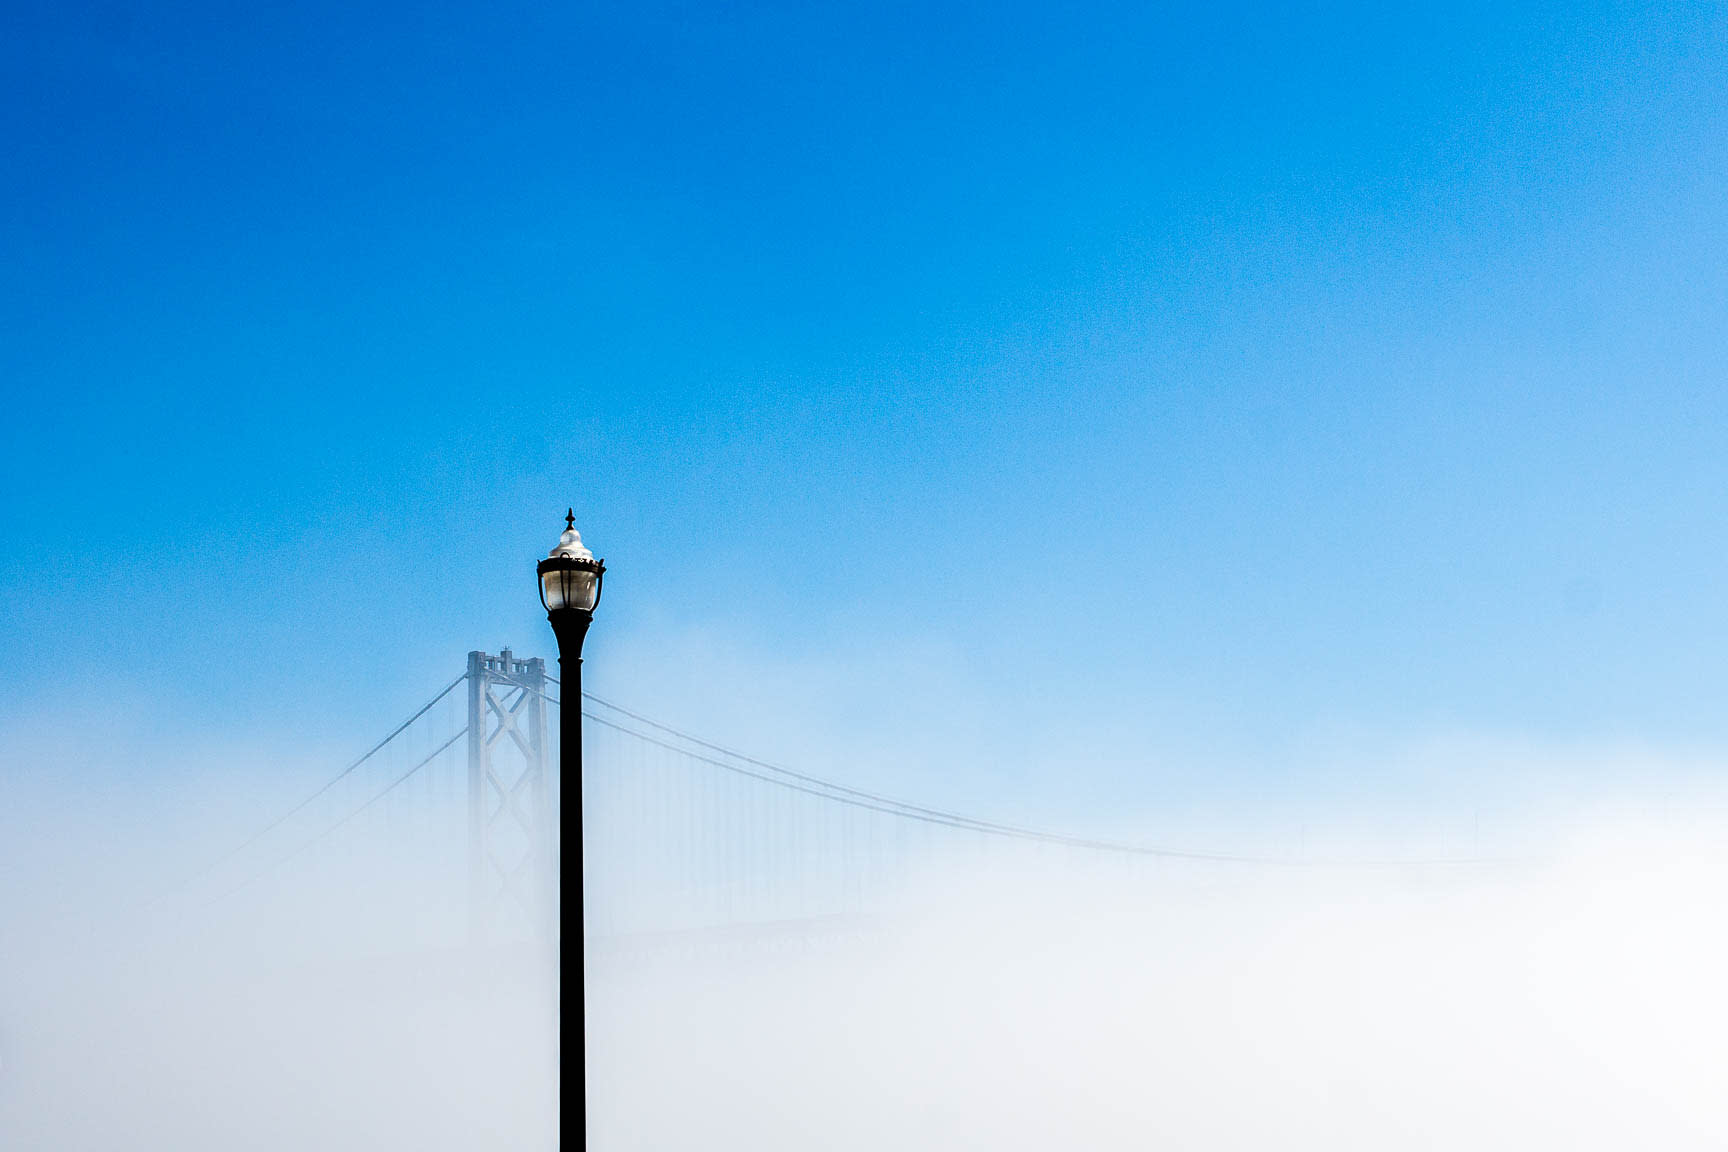 Lamp in front of a bridge fading into fog